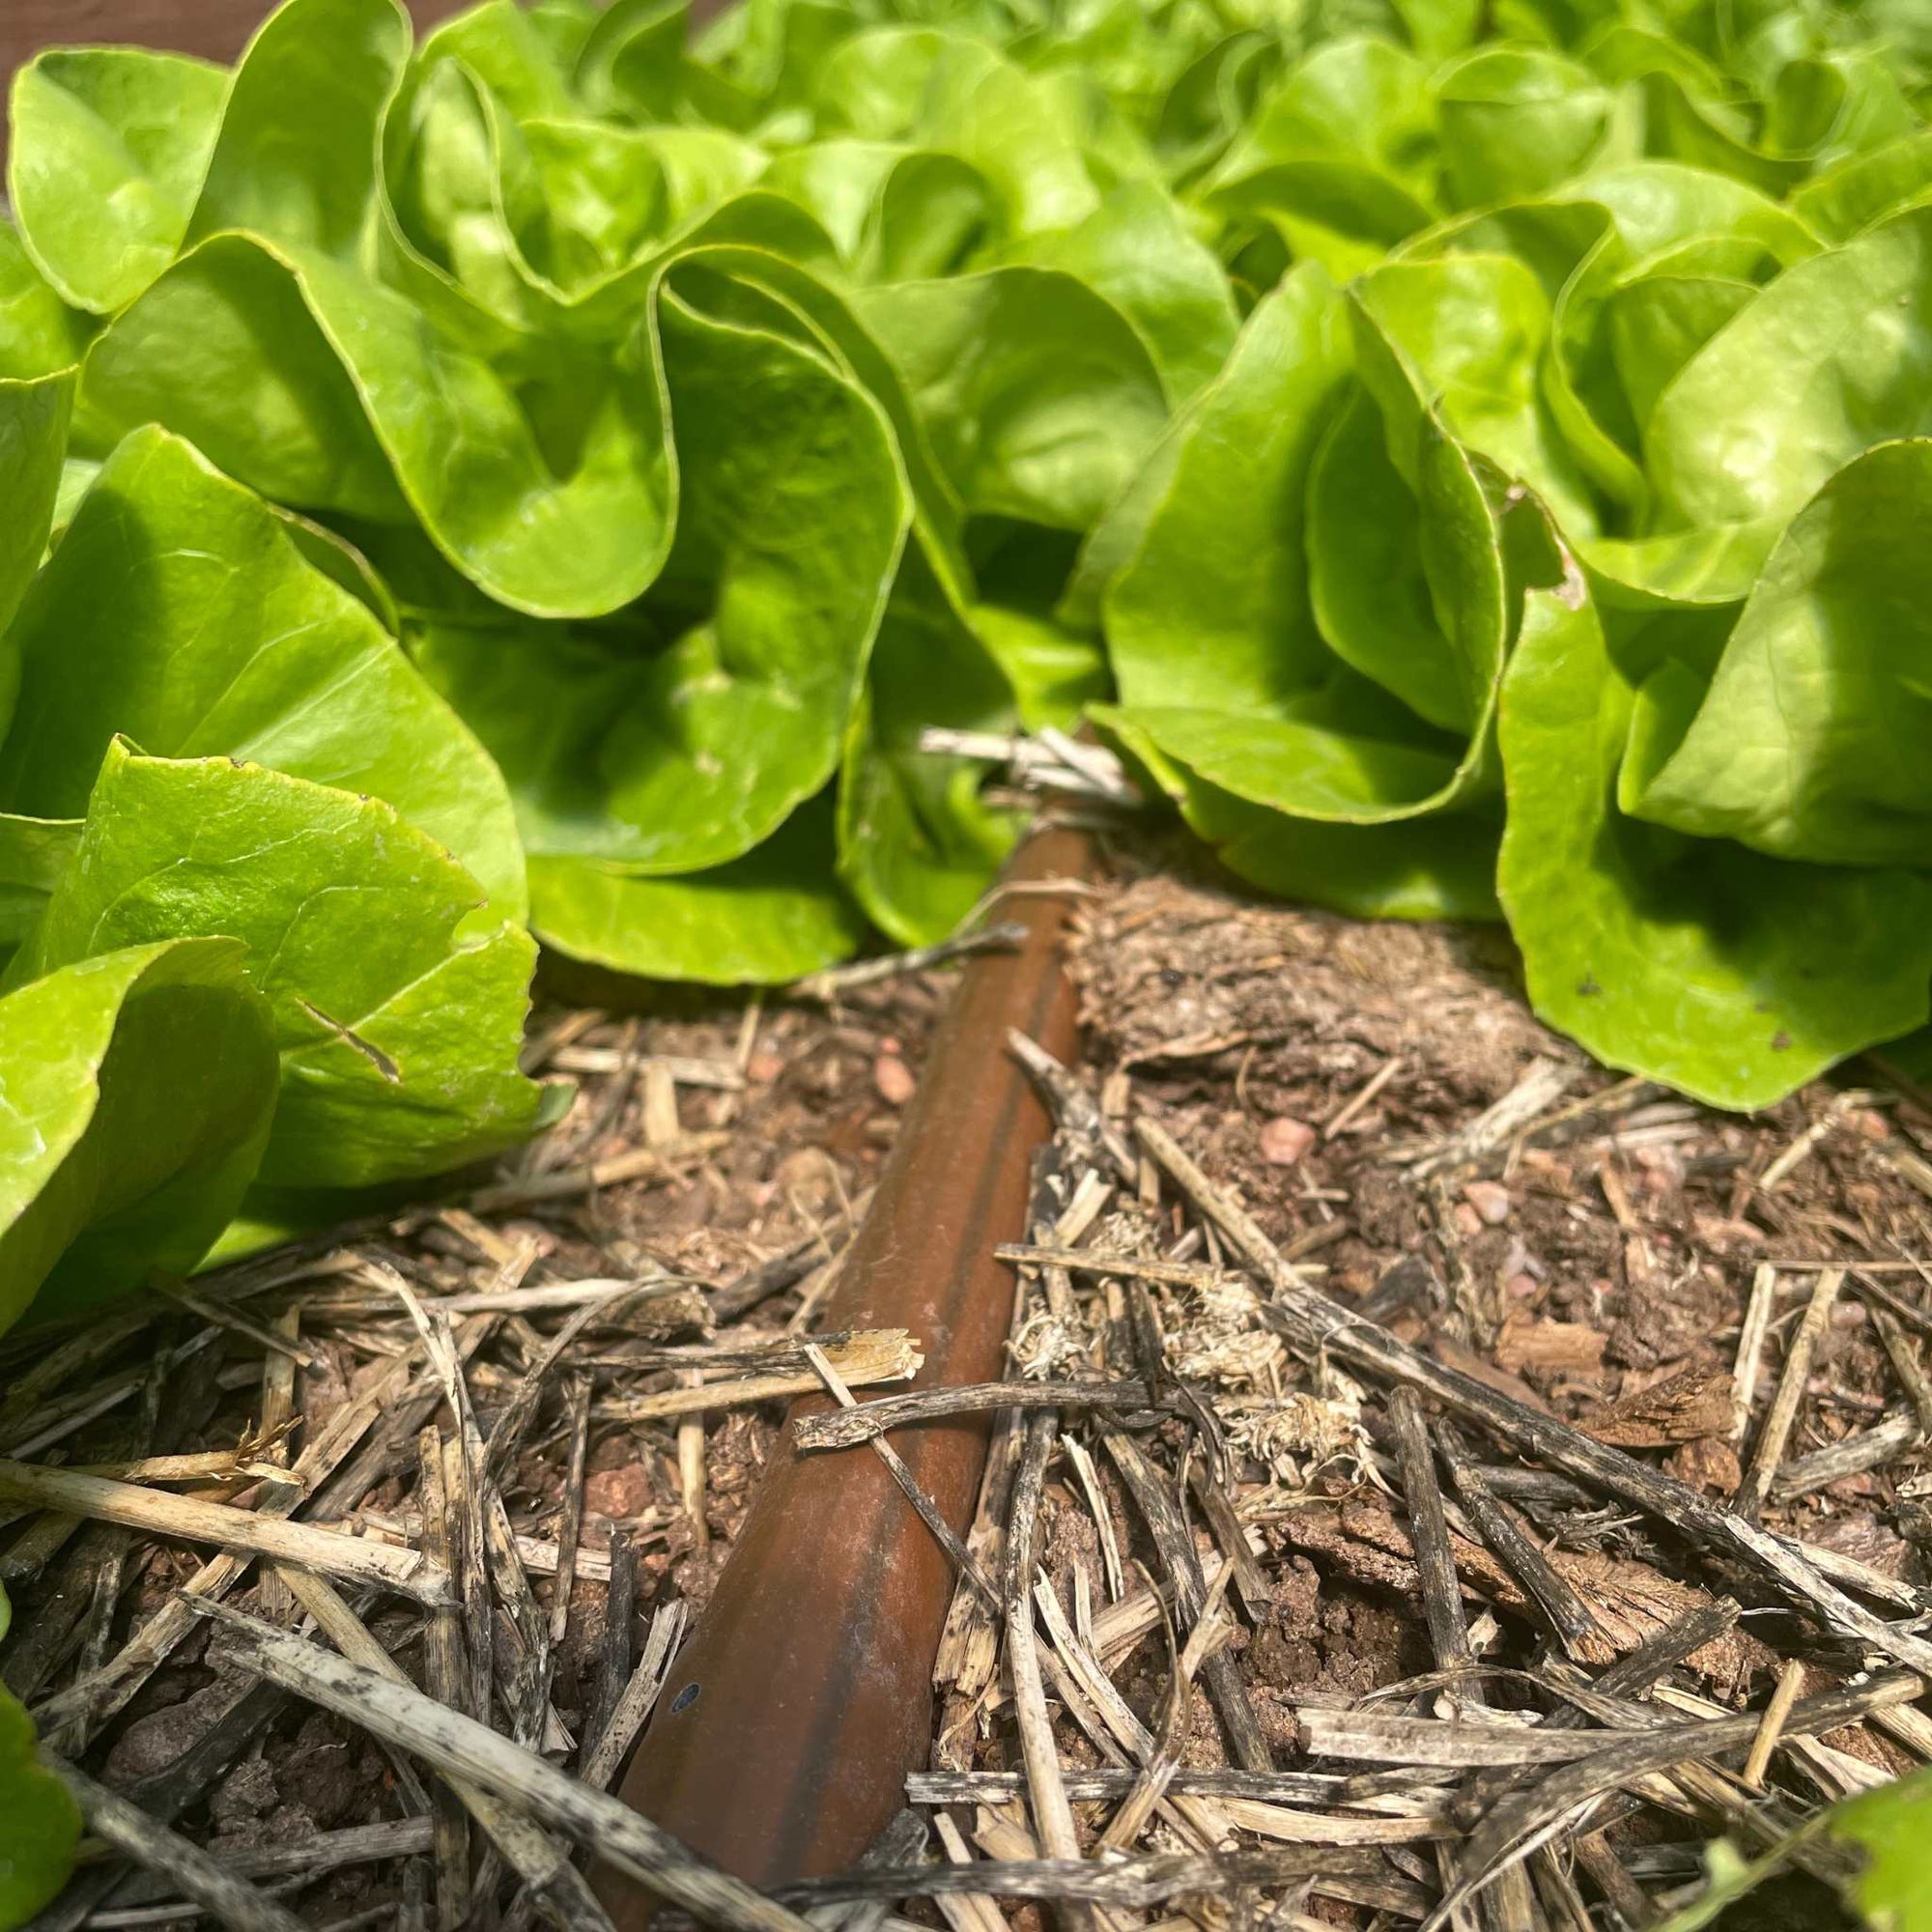 Drip Irrigation and lettuce